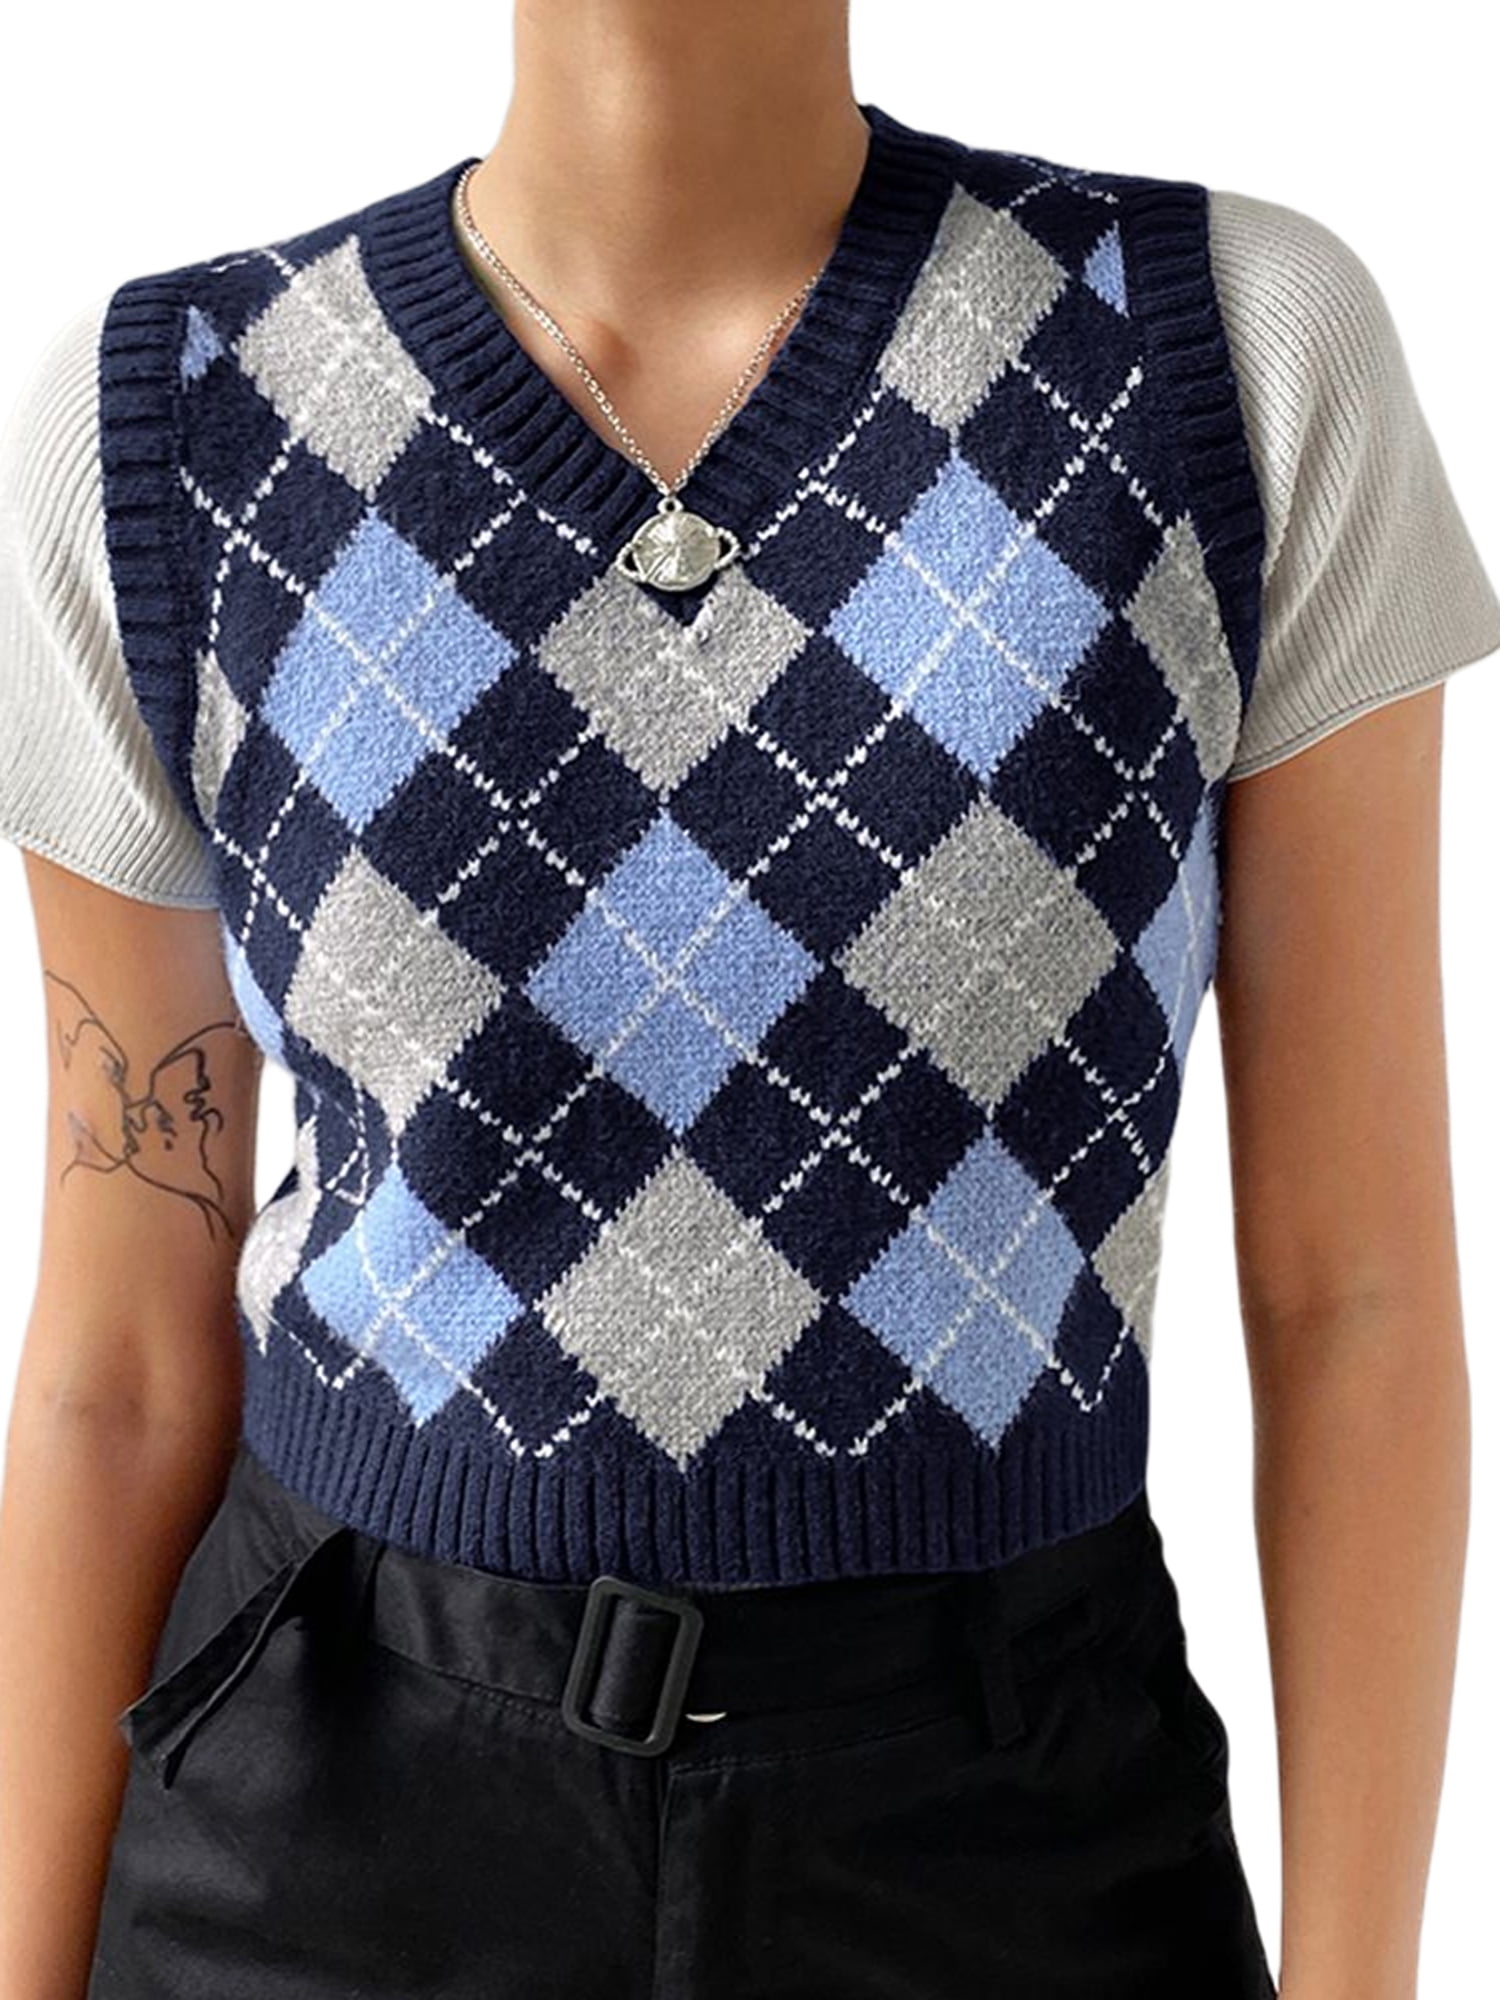 Women 's Argyle Knitted Plaid Sweater Vintage Preppy Style Long Sleeve V-Neck Button Cardigan E-Girls 90s